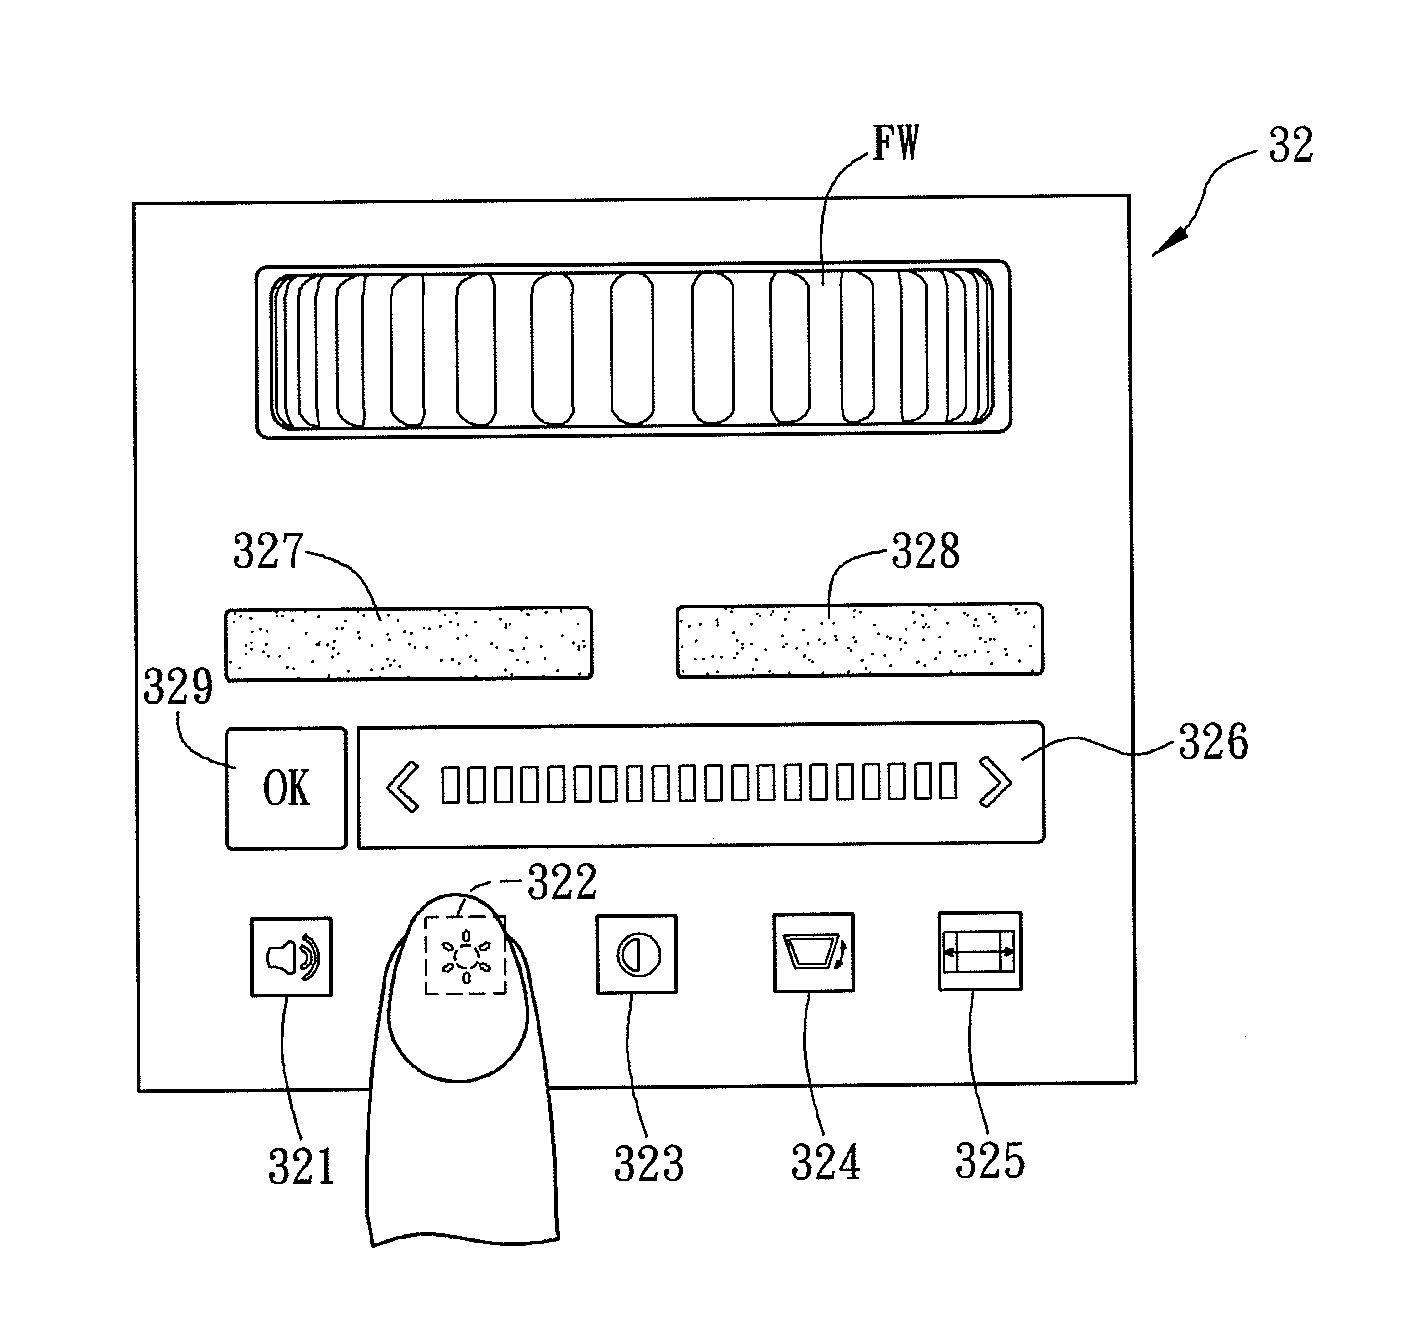 Electronic device and method for adjusting settings thereof